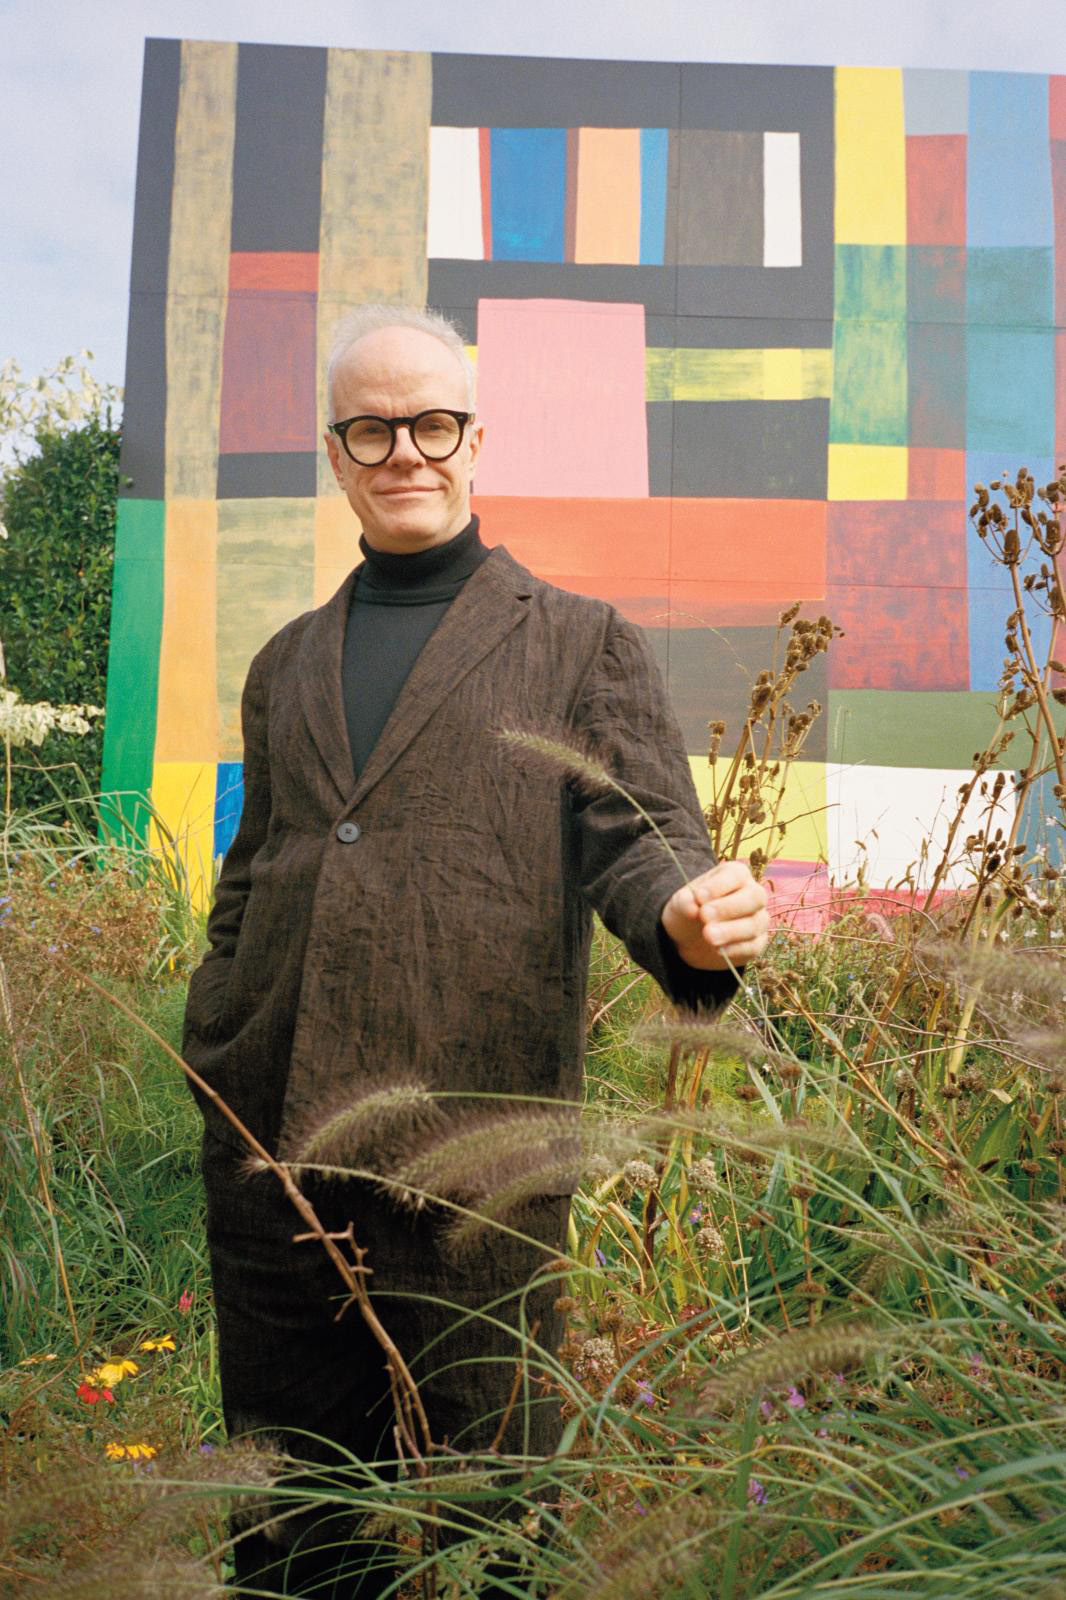 Hans-Ulrich Obrist: A Career in a Straight Line